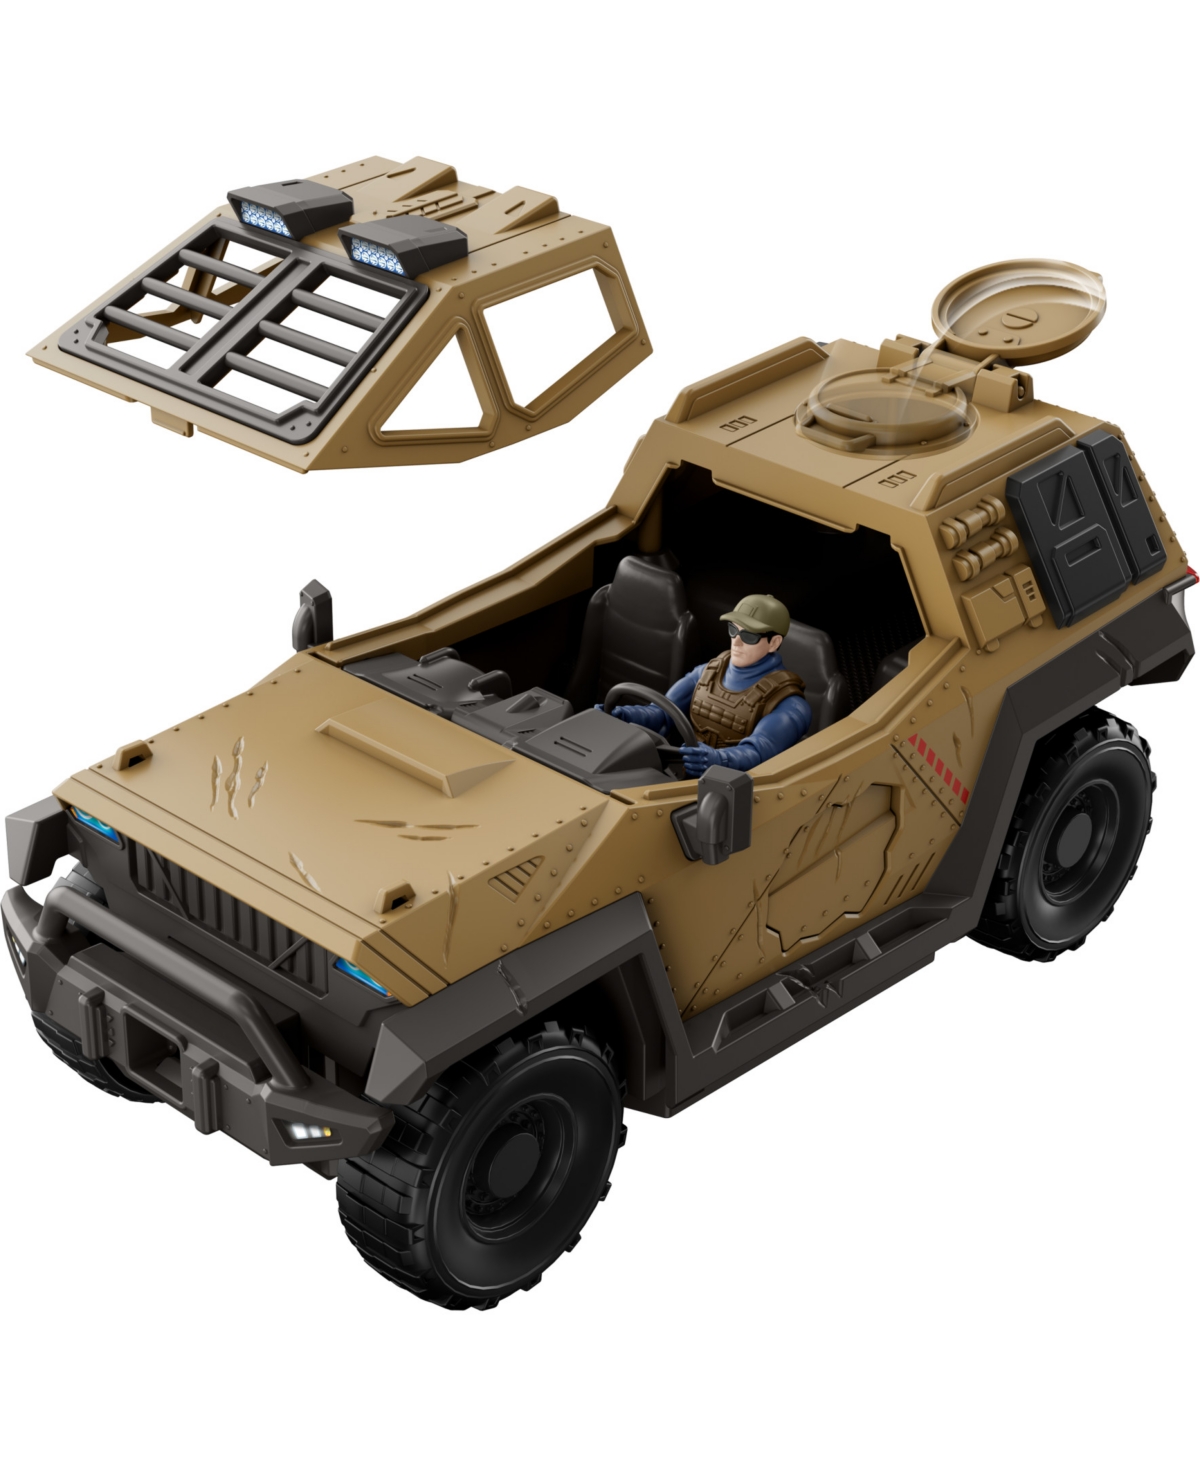 Shop Jurassic World Truck And Dinosaur Action Figure Toy With Flipping Feature In No Color